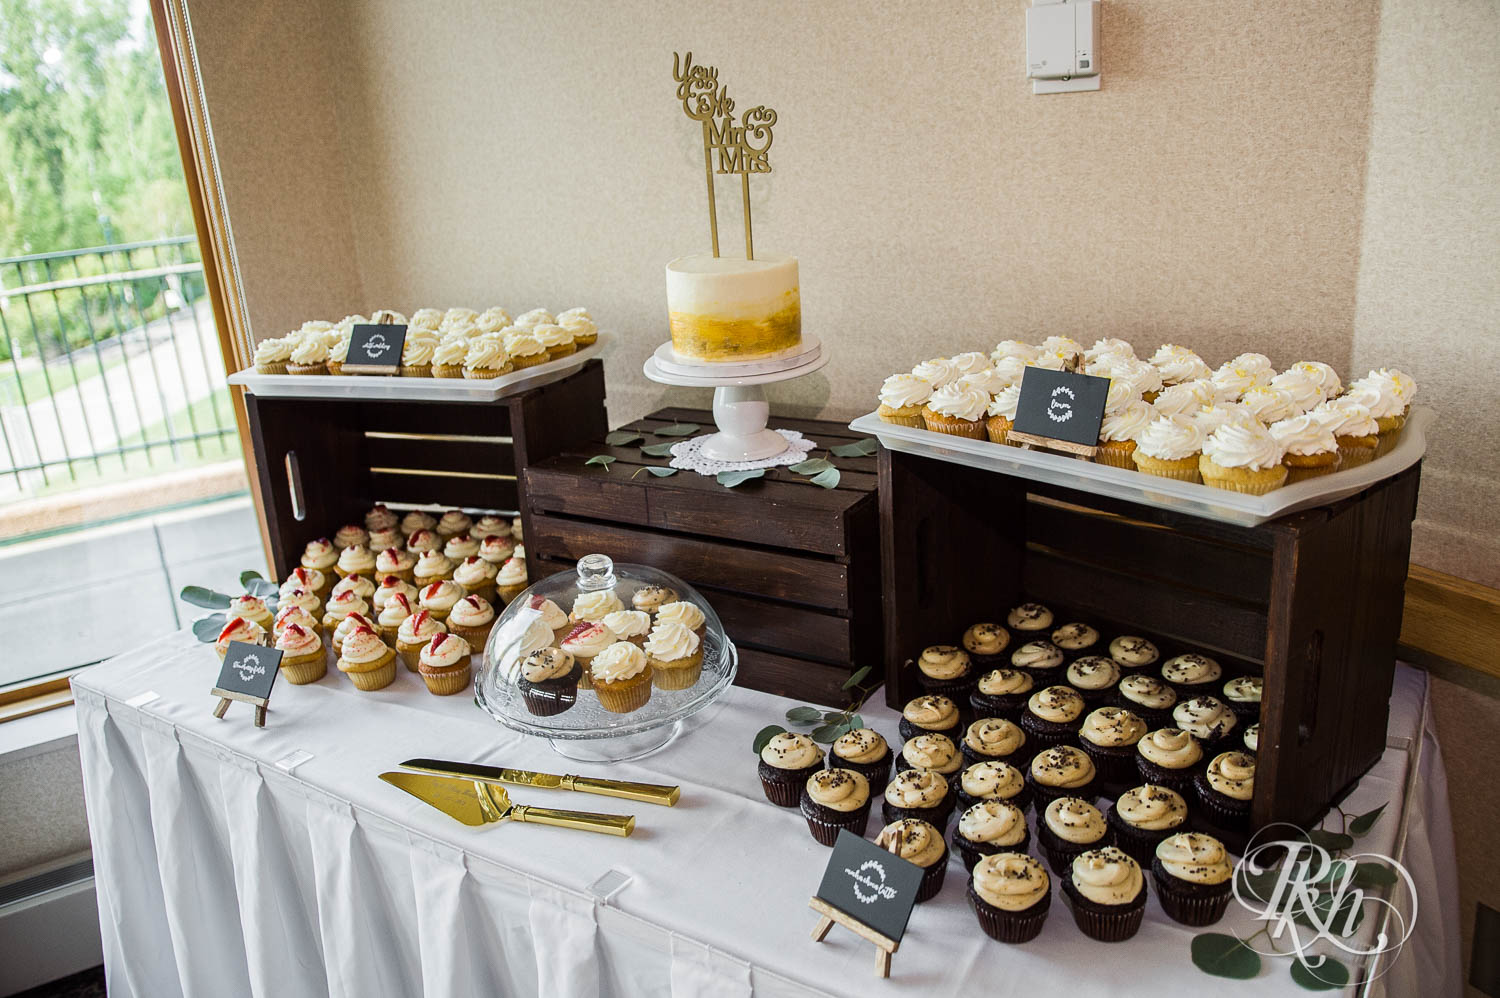 Wedding desert table with cupcakes at Plymouth Creek Center in Plymouth, Minnesota.